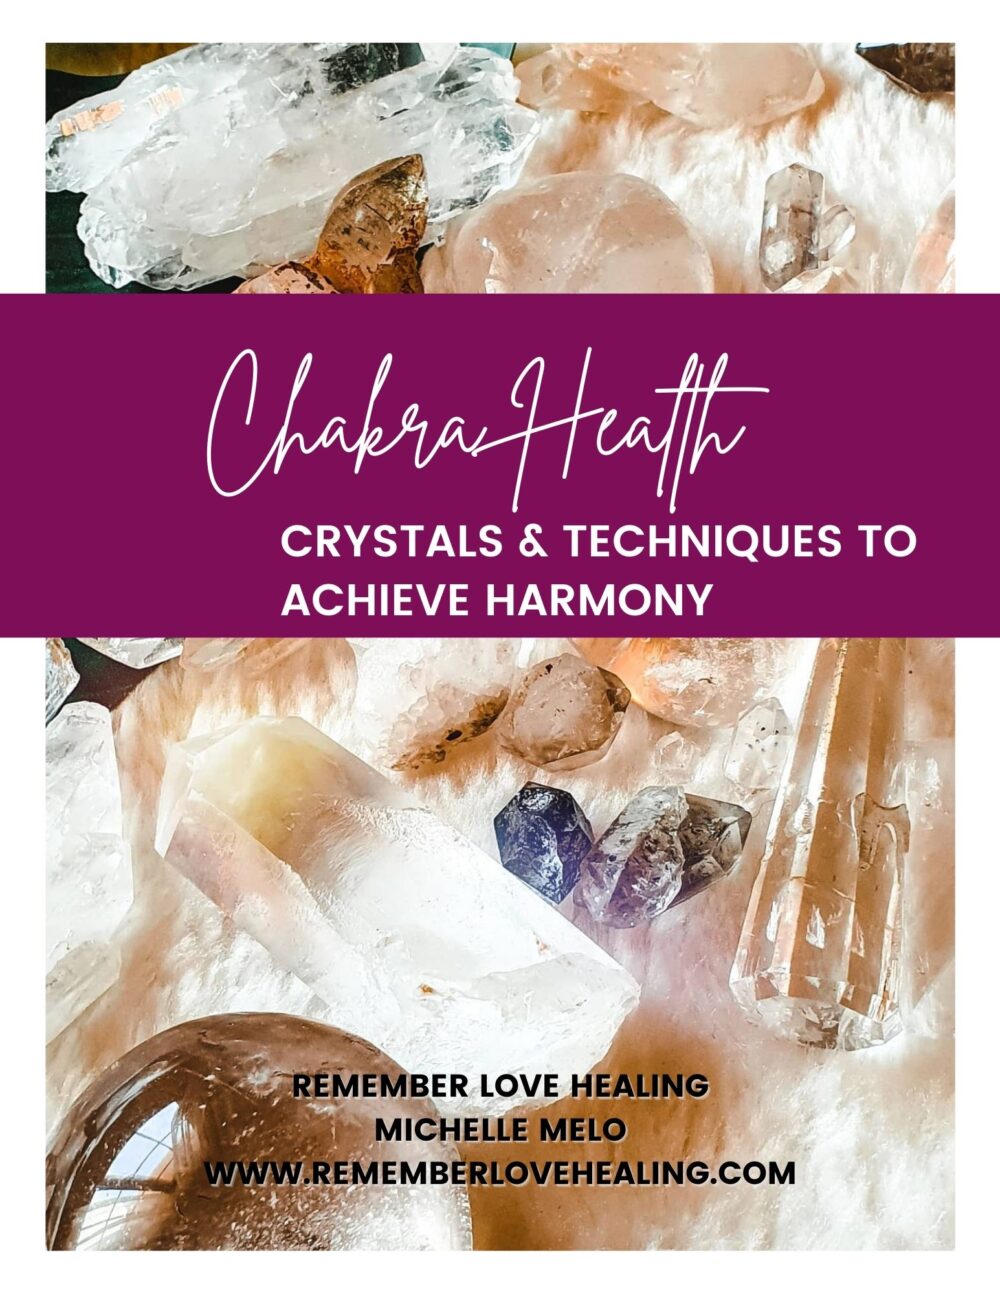 Chakra Health Preview Cover